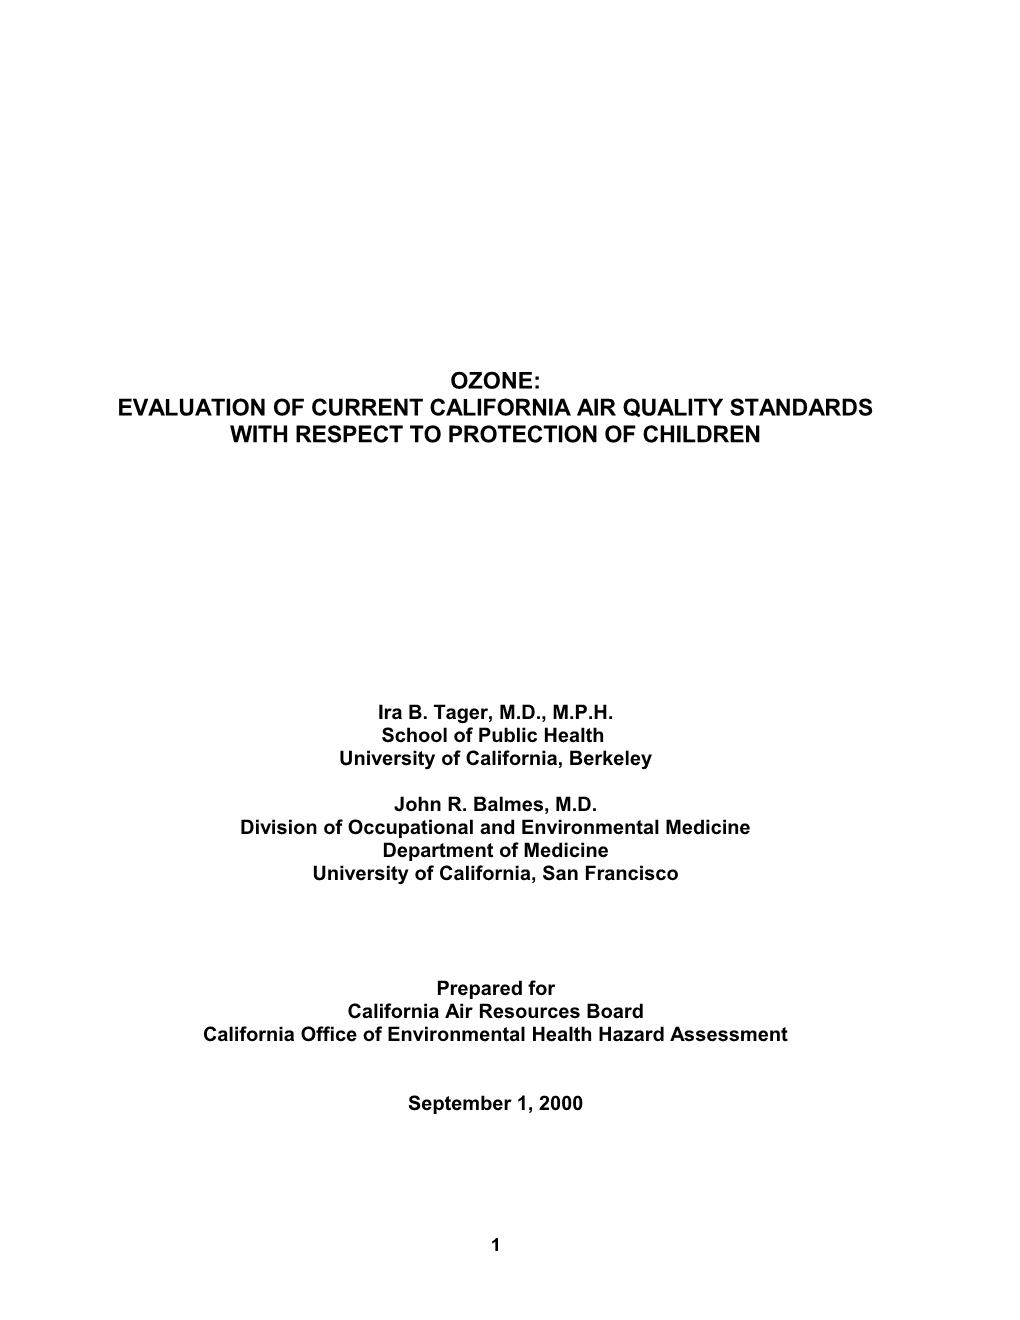 Evaluation of Current California Air Quality Standards with Respect to Protection of Children